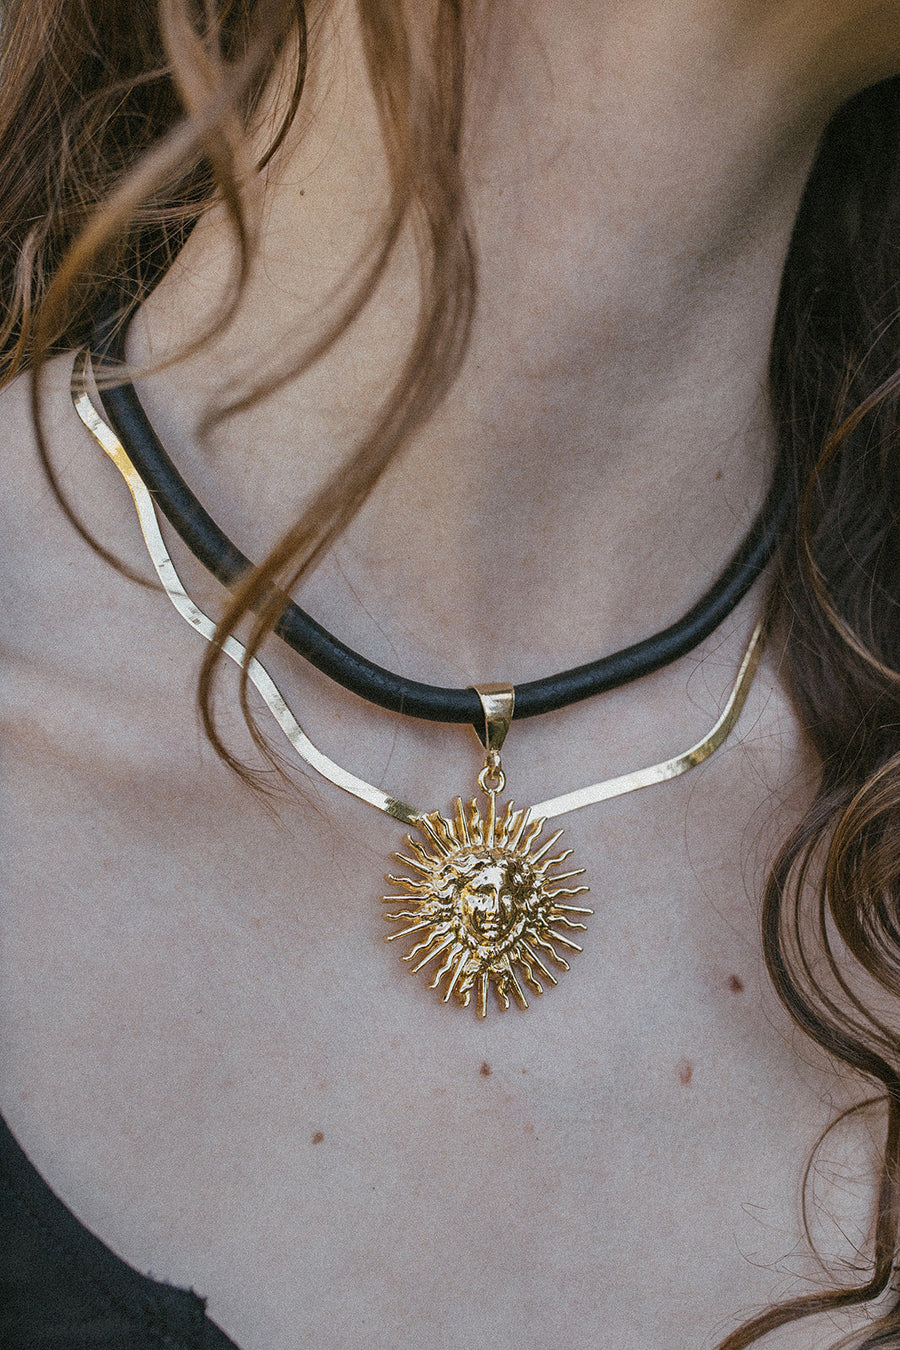 Om Imports Jewelry Gold Medusa Leather Necklace.:.Gold